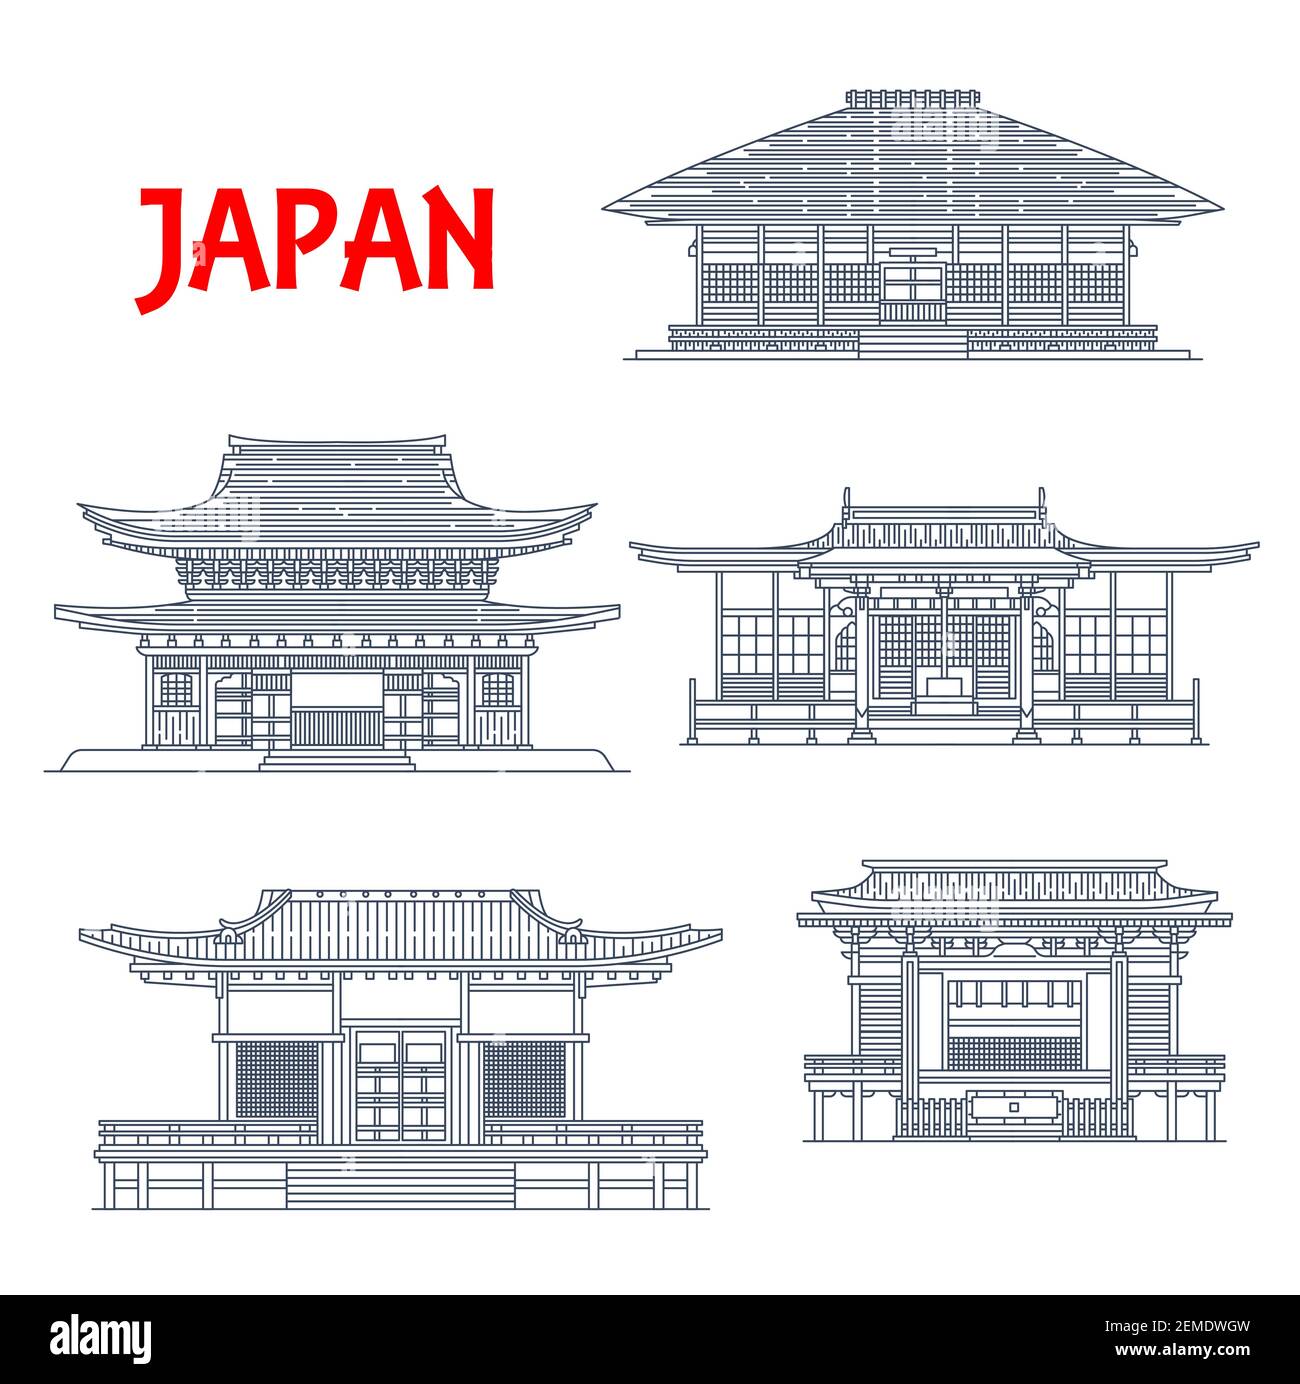 How to Draw a Japanese Temple Building in the Snow - YouTube